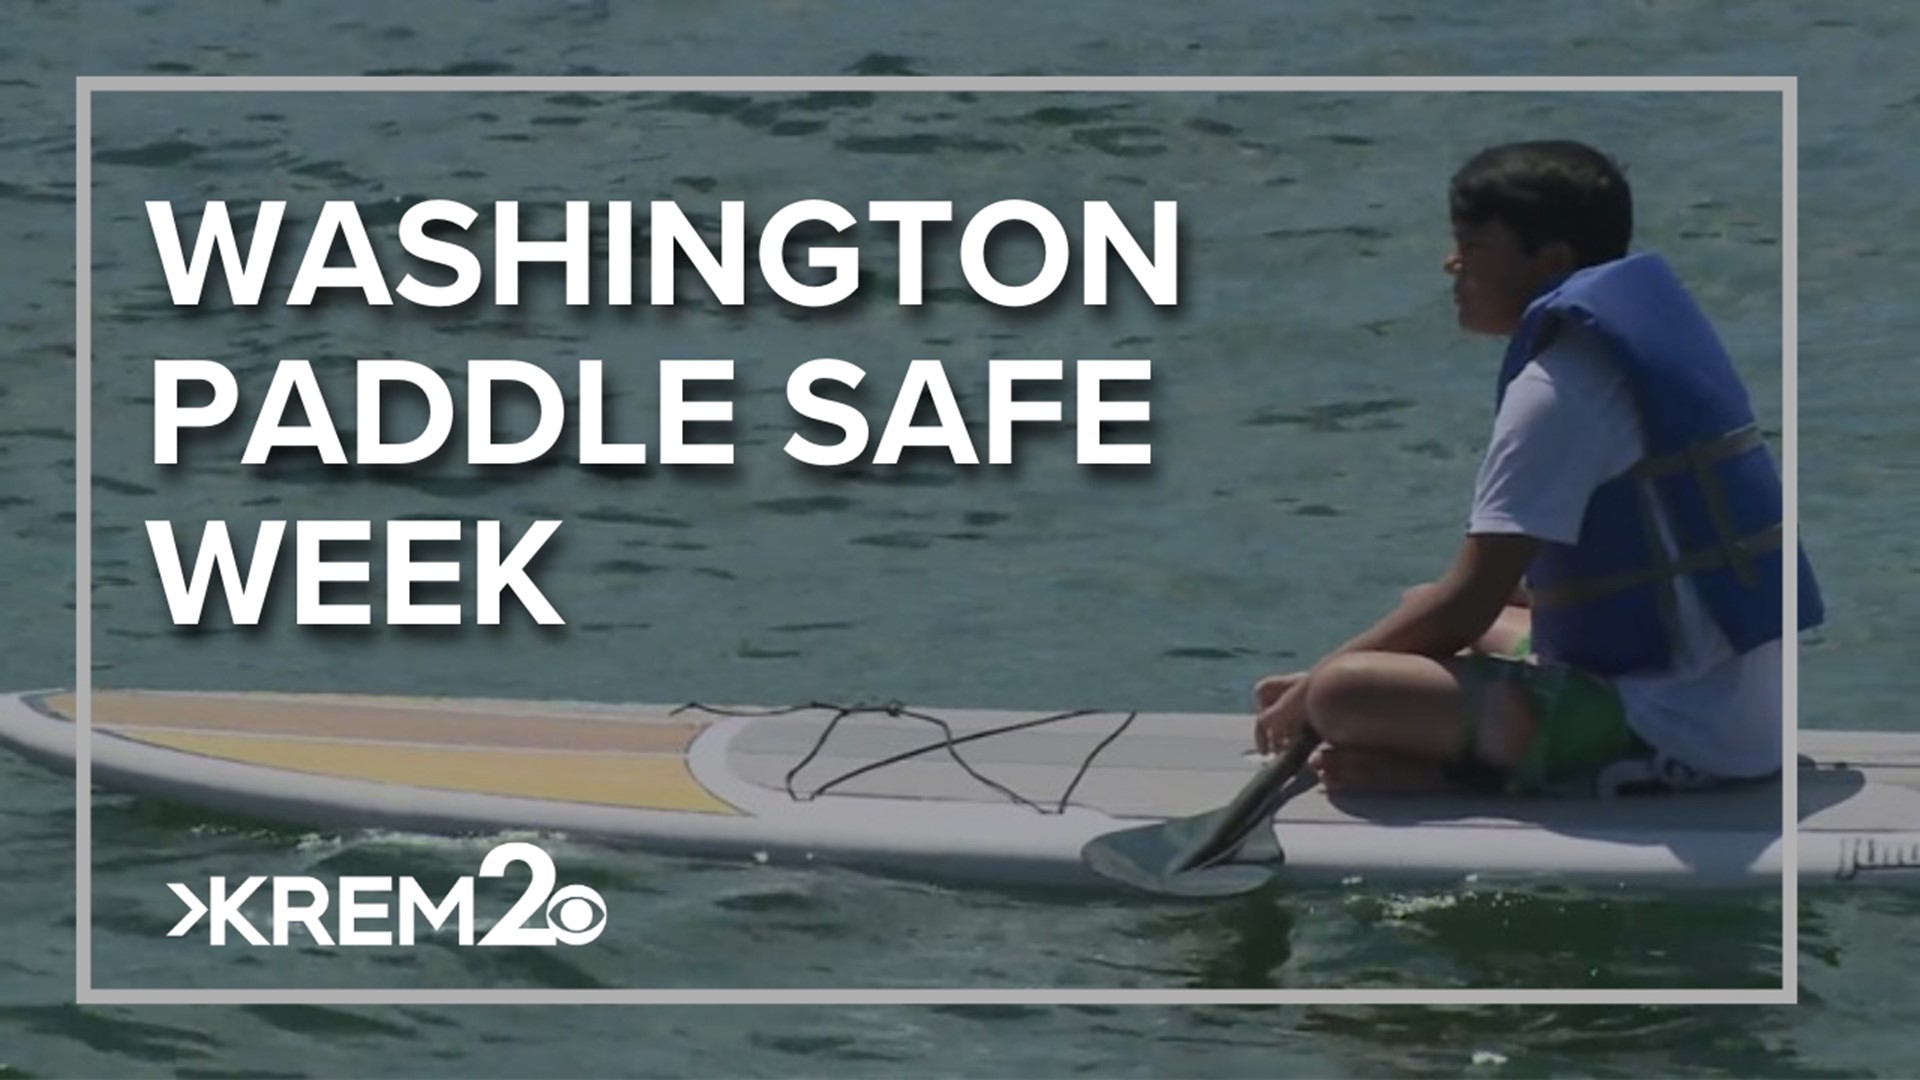 In the last five years, a spokesperson for Washington state says more than half of all boating deaths have been paddlers.